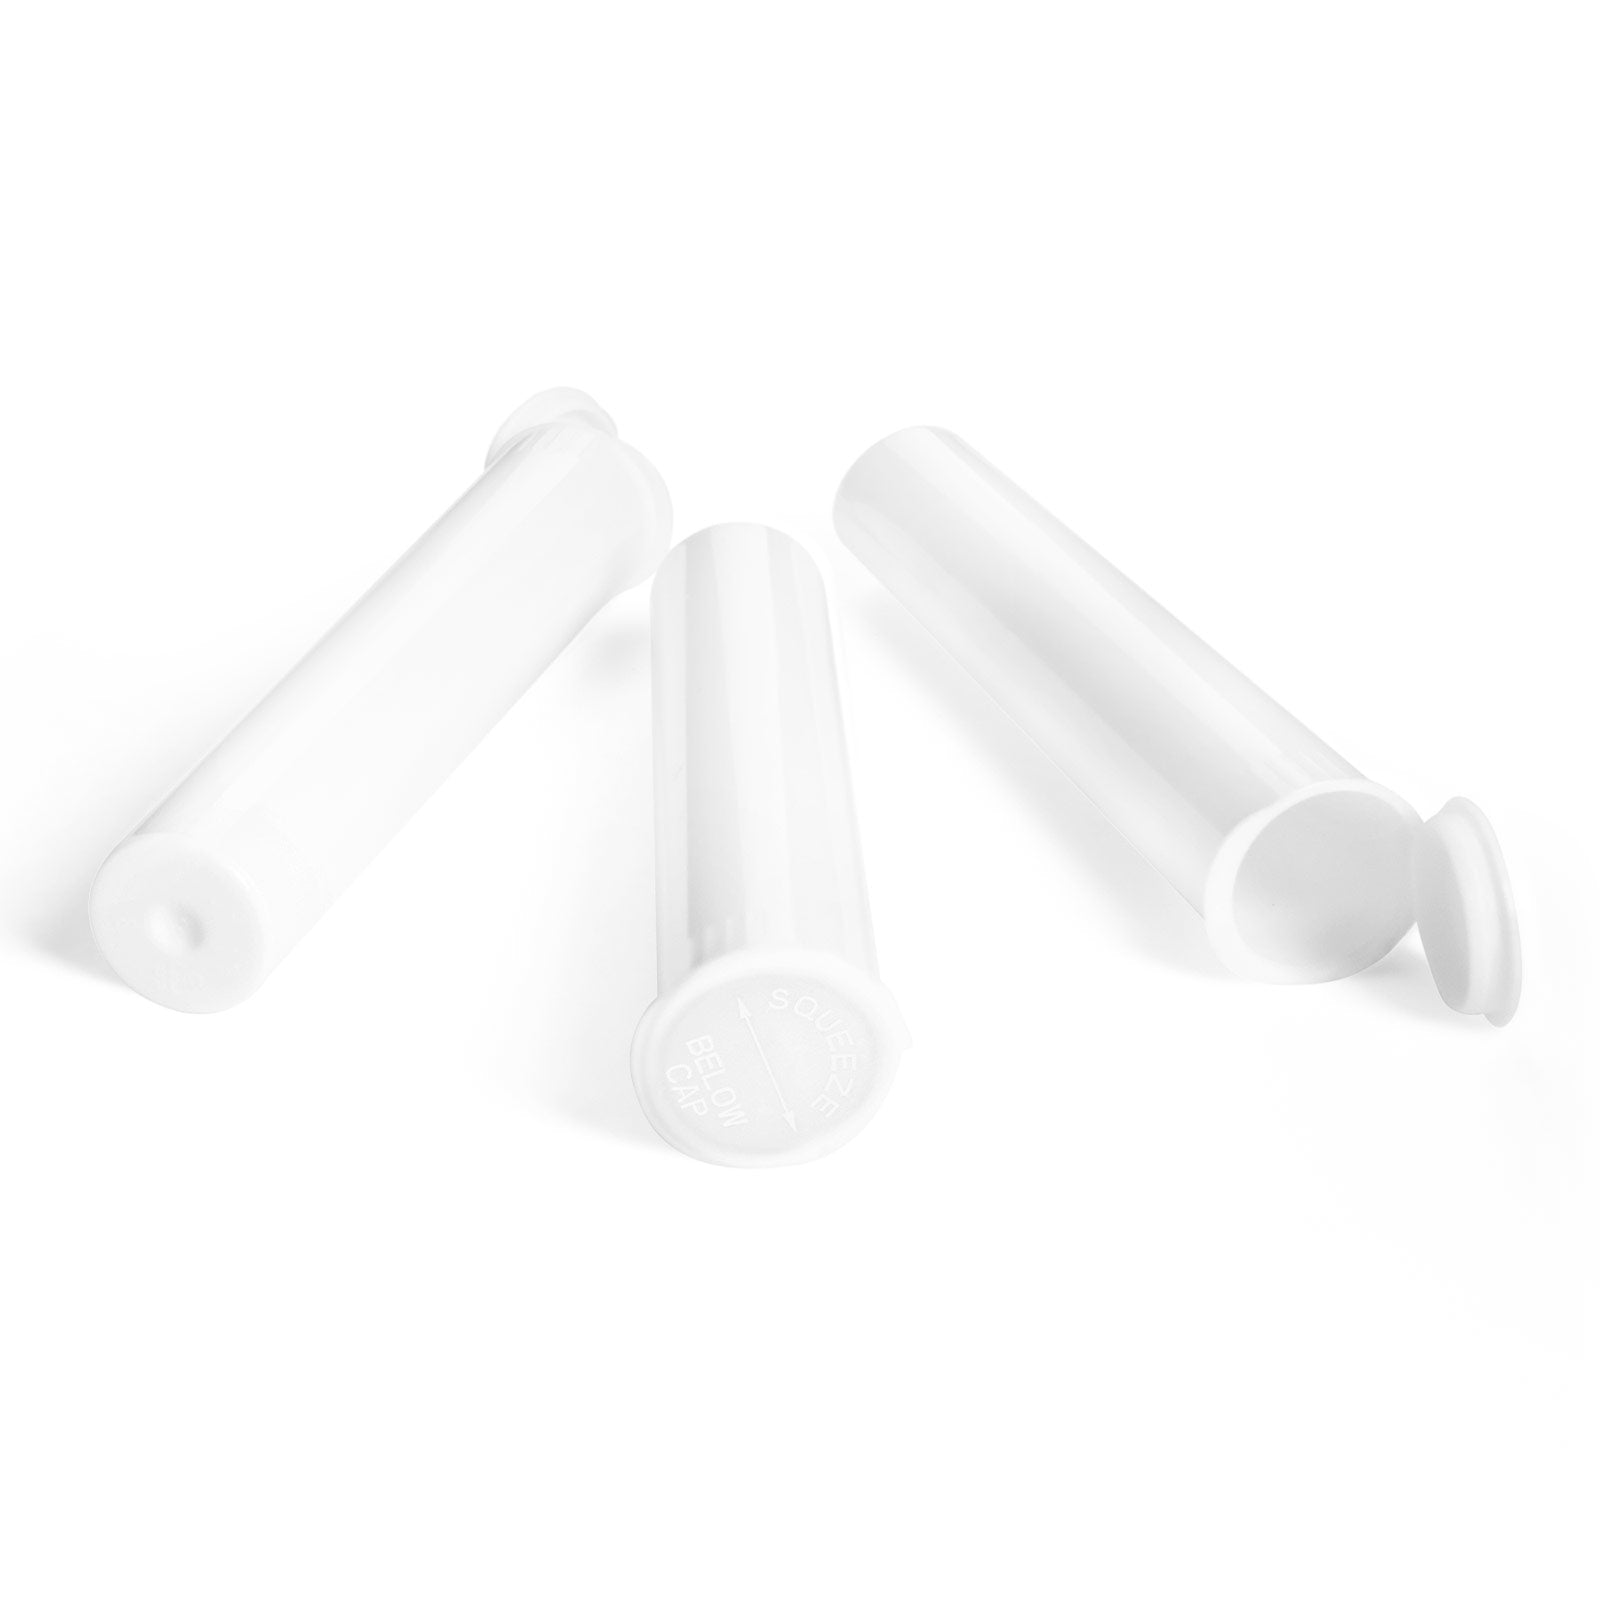 98mm Rx Squeeze Tubes Opaque White - 700 Count